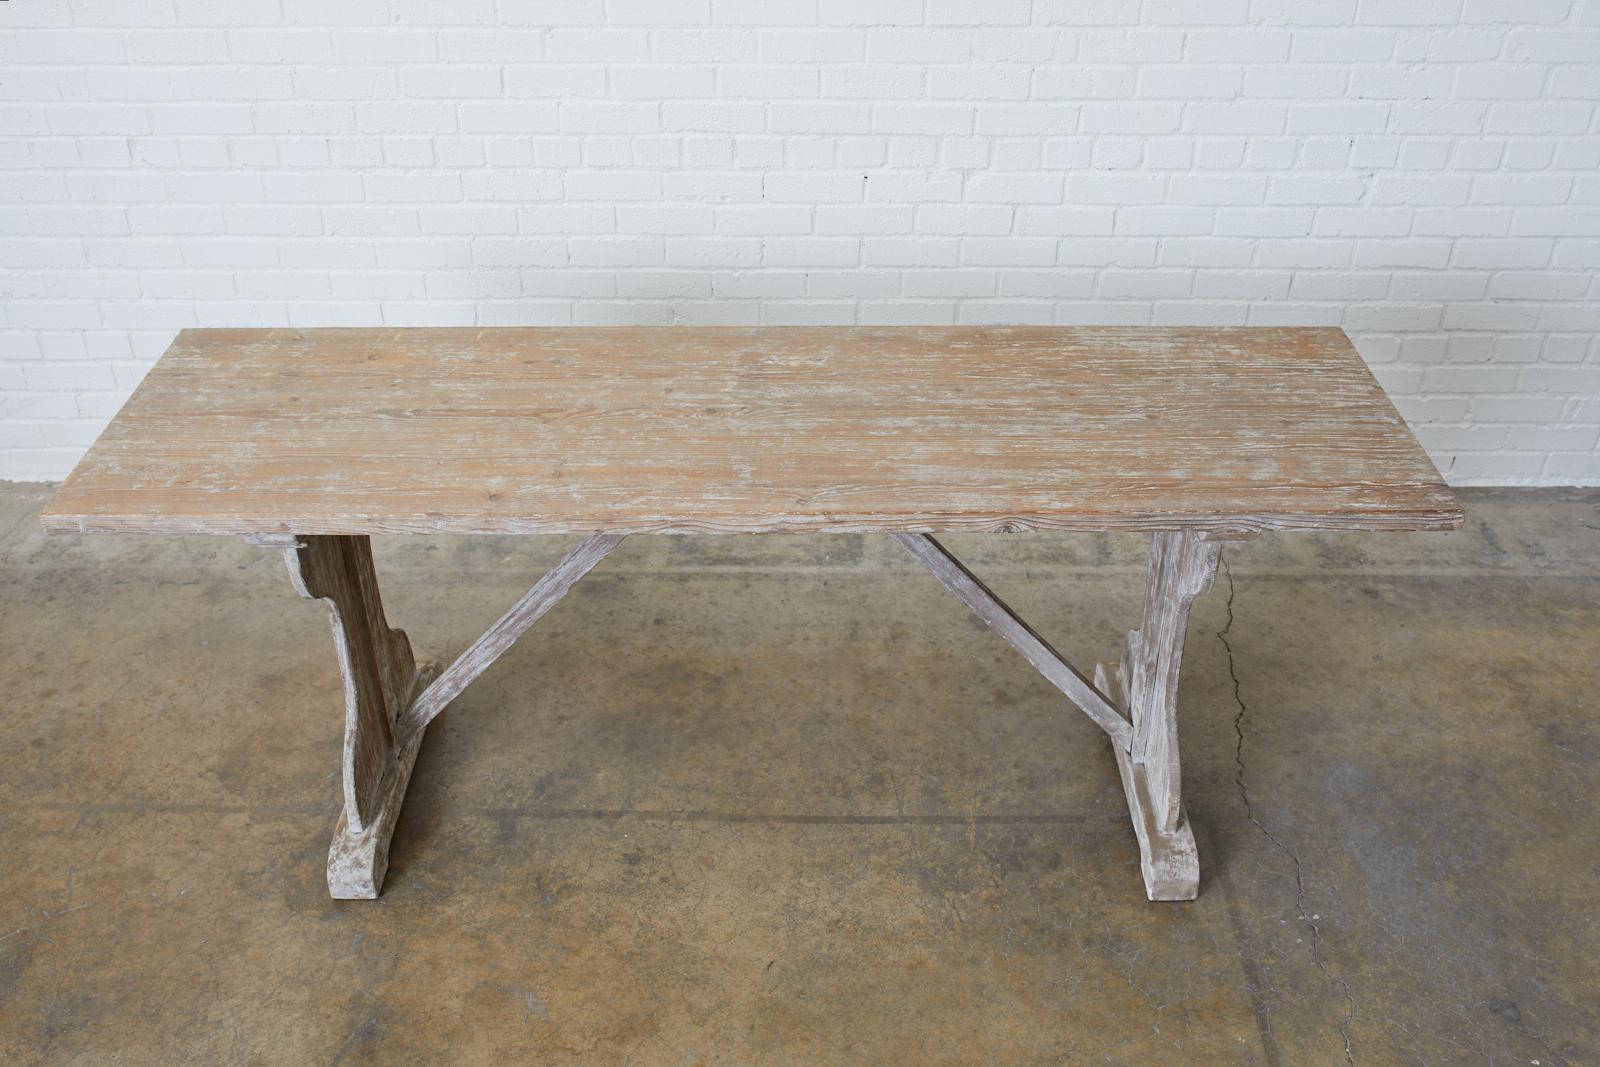 Rustic 20th century country French painted pine farmhouse table or console having trestle legs. Beautifully crafted with a washed or painted finish giving it an aged patina full of character and charm. This table is dining height and could be used